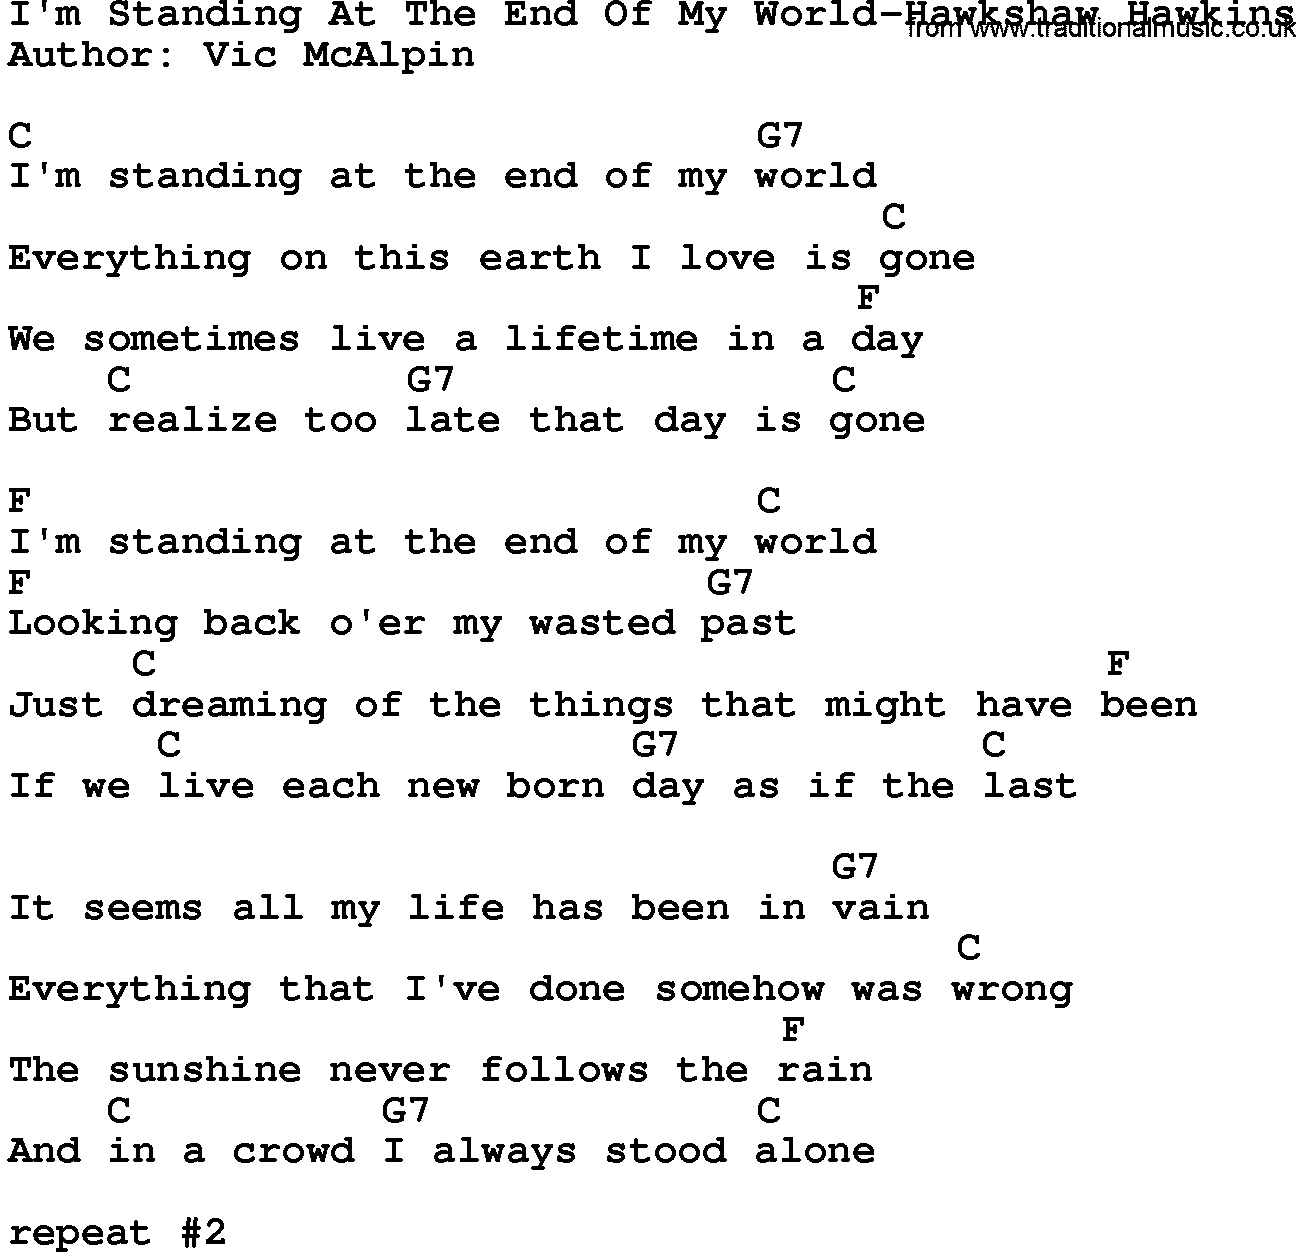 Country music song: I'm Standing At The End Of My World-Hawkshaw Hawkins lyrics and chords